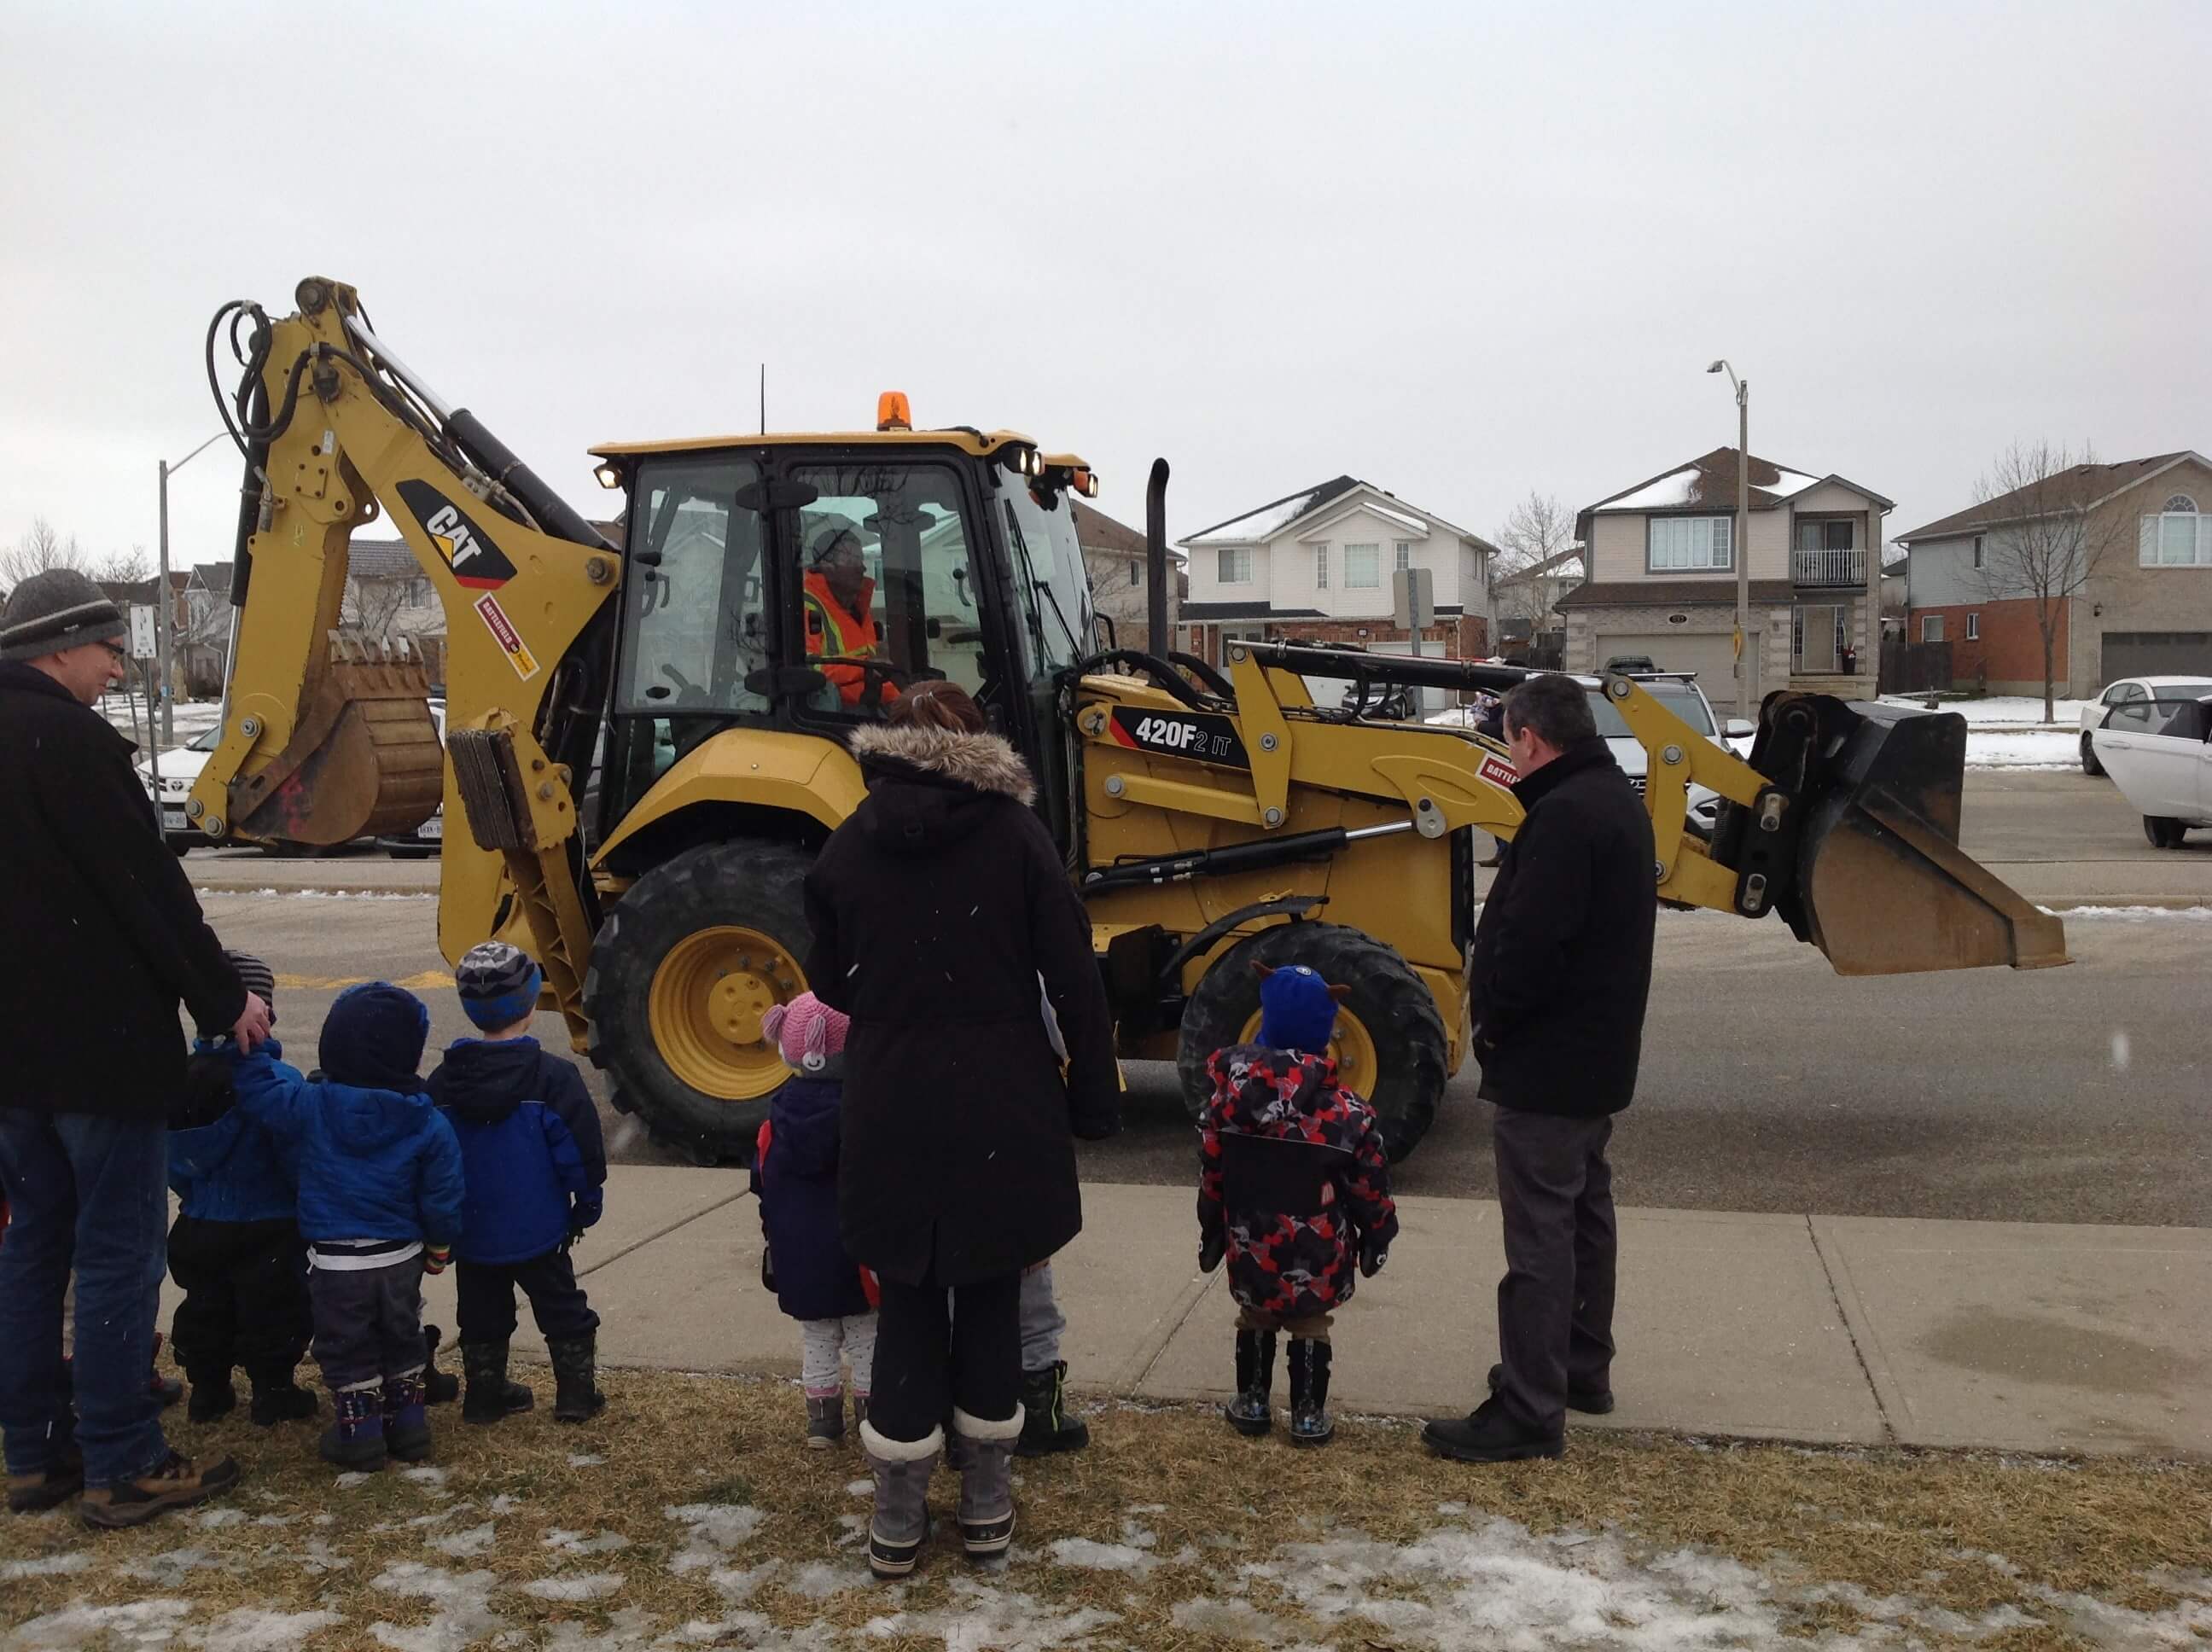 children watching a real digger